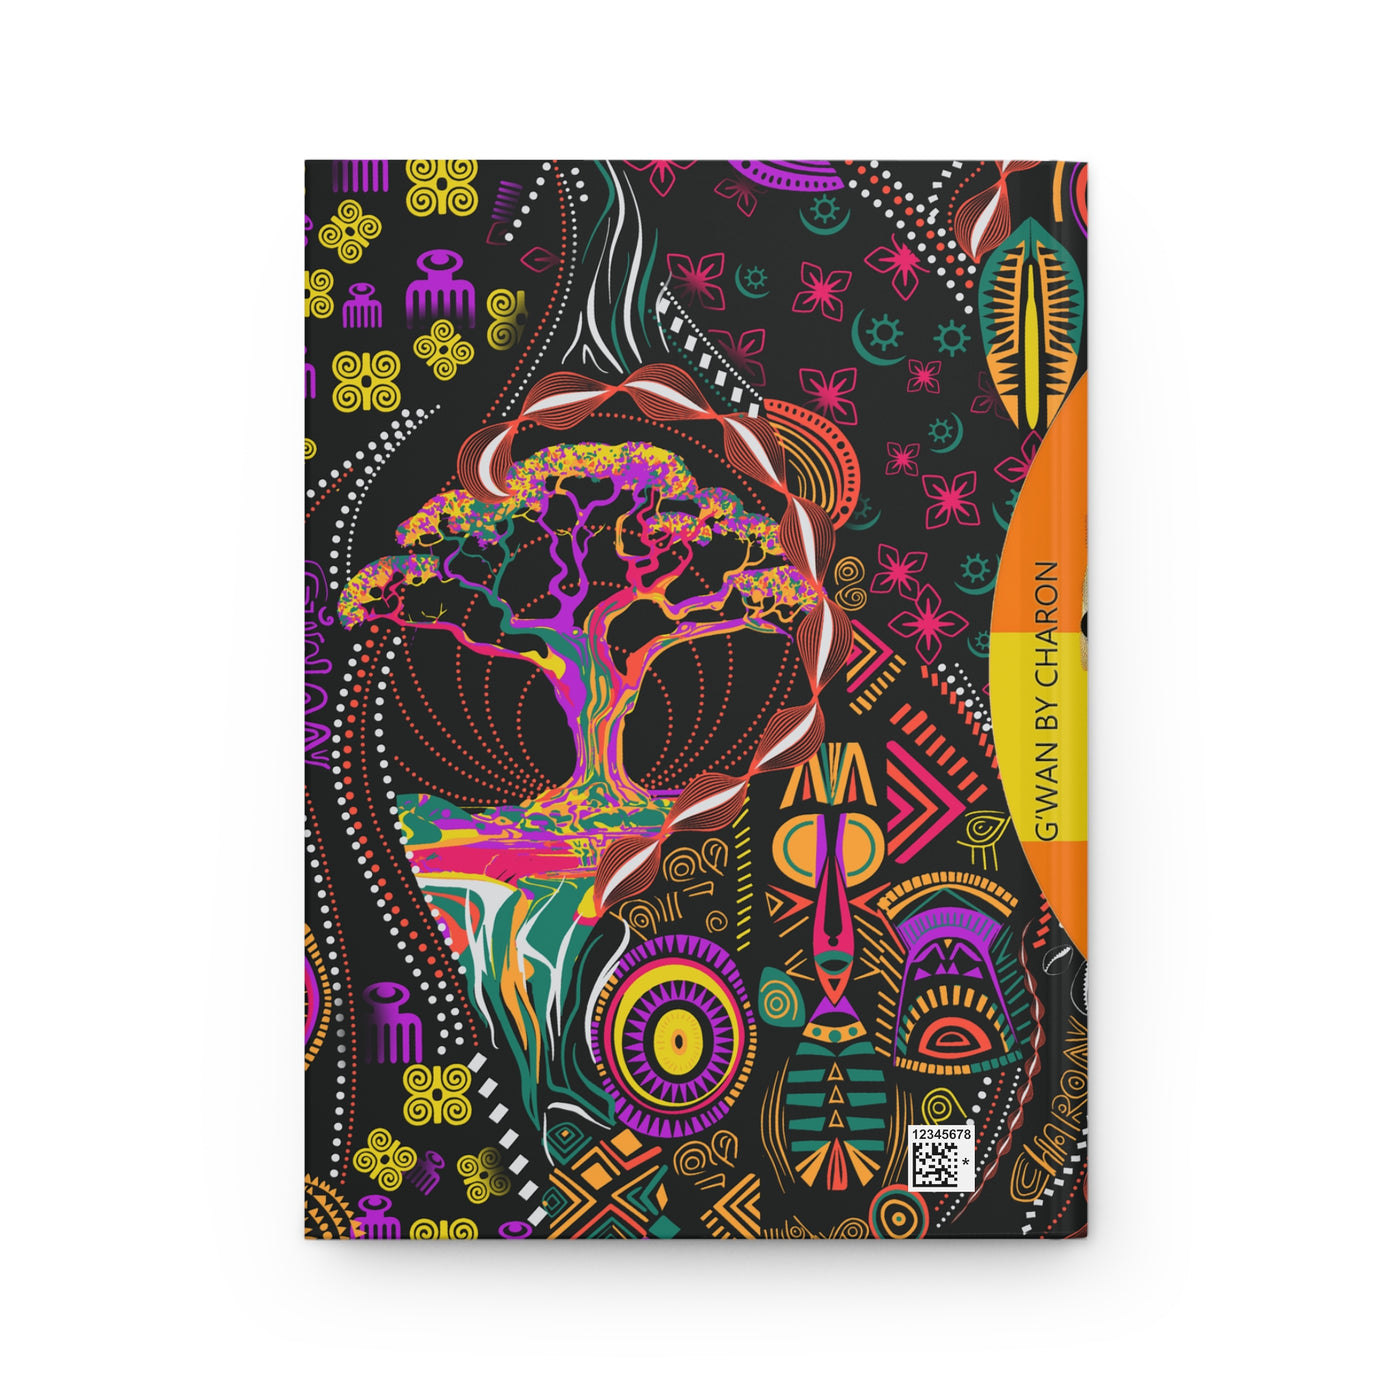 Resilience Hardcover Journal Matte |Surge Collection - G'wan by Charon